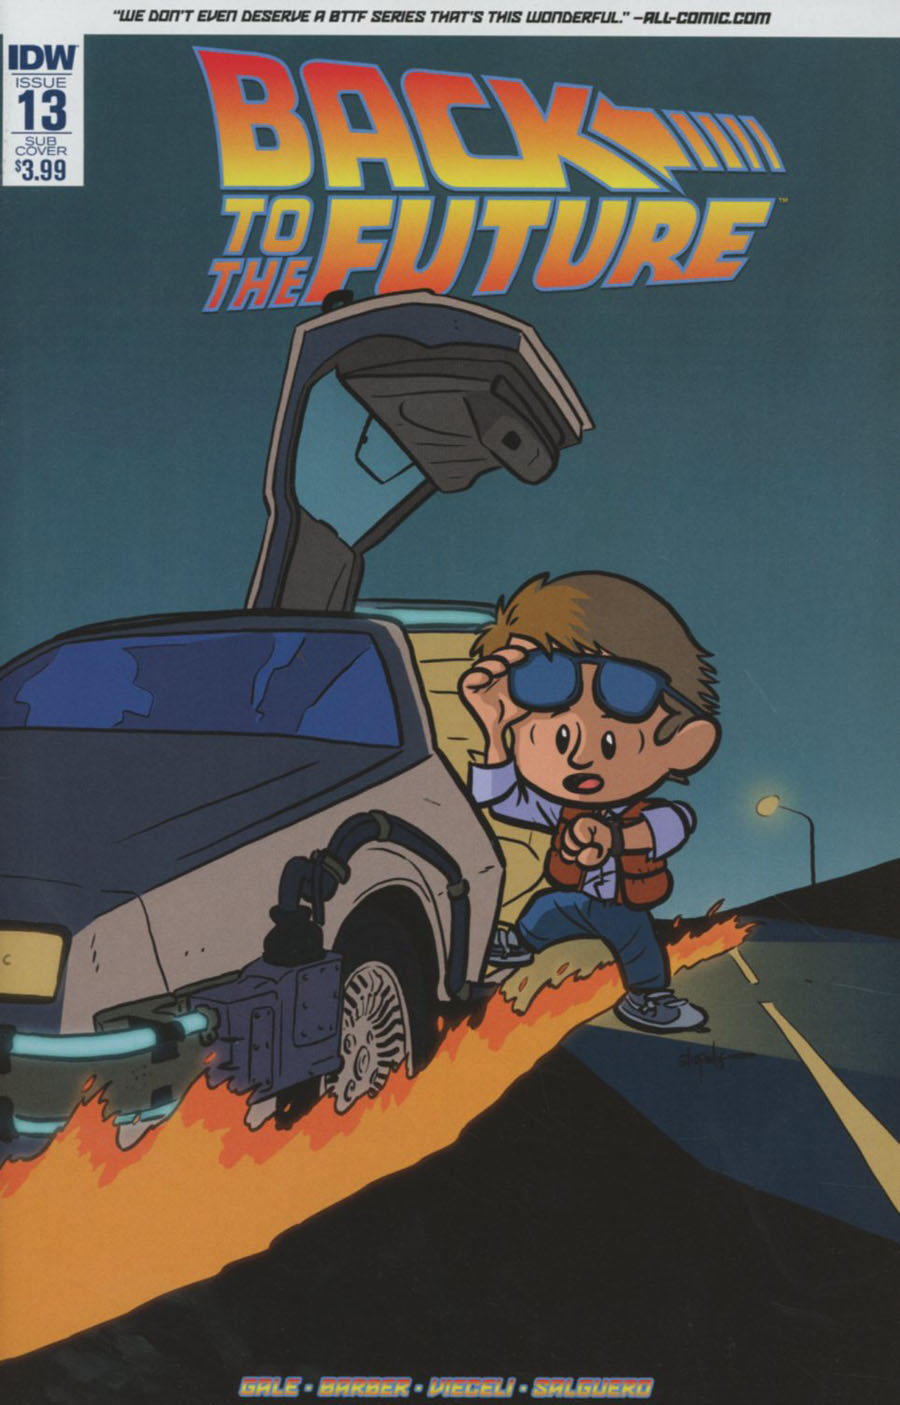 Back To The Future Vol 2 #13 Cover B Variant Chris Eliopoulous Subscription Cover